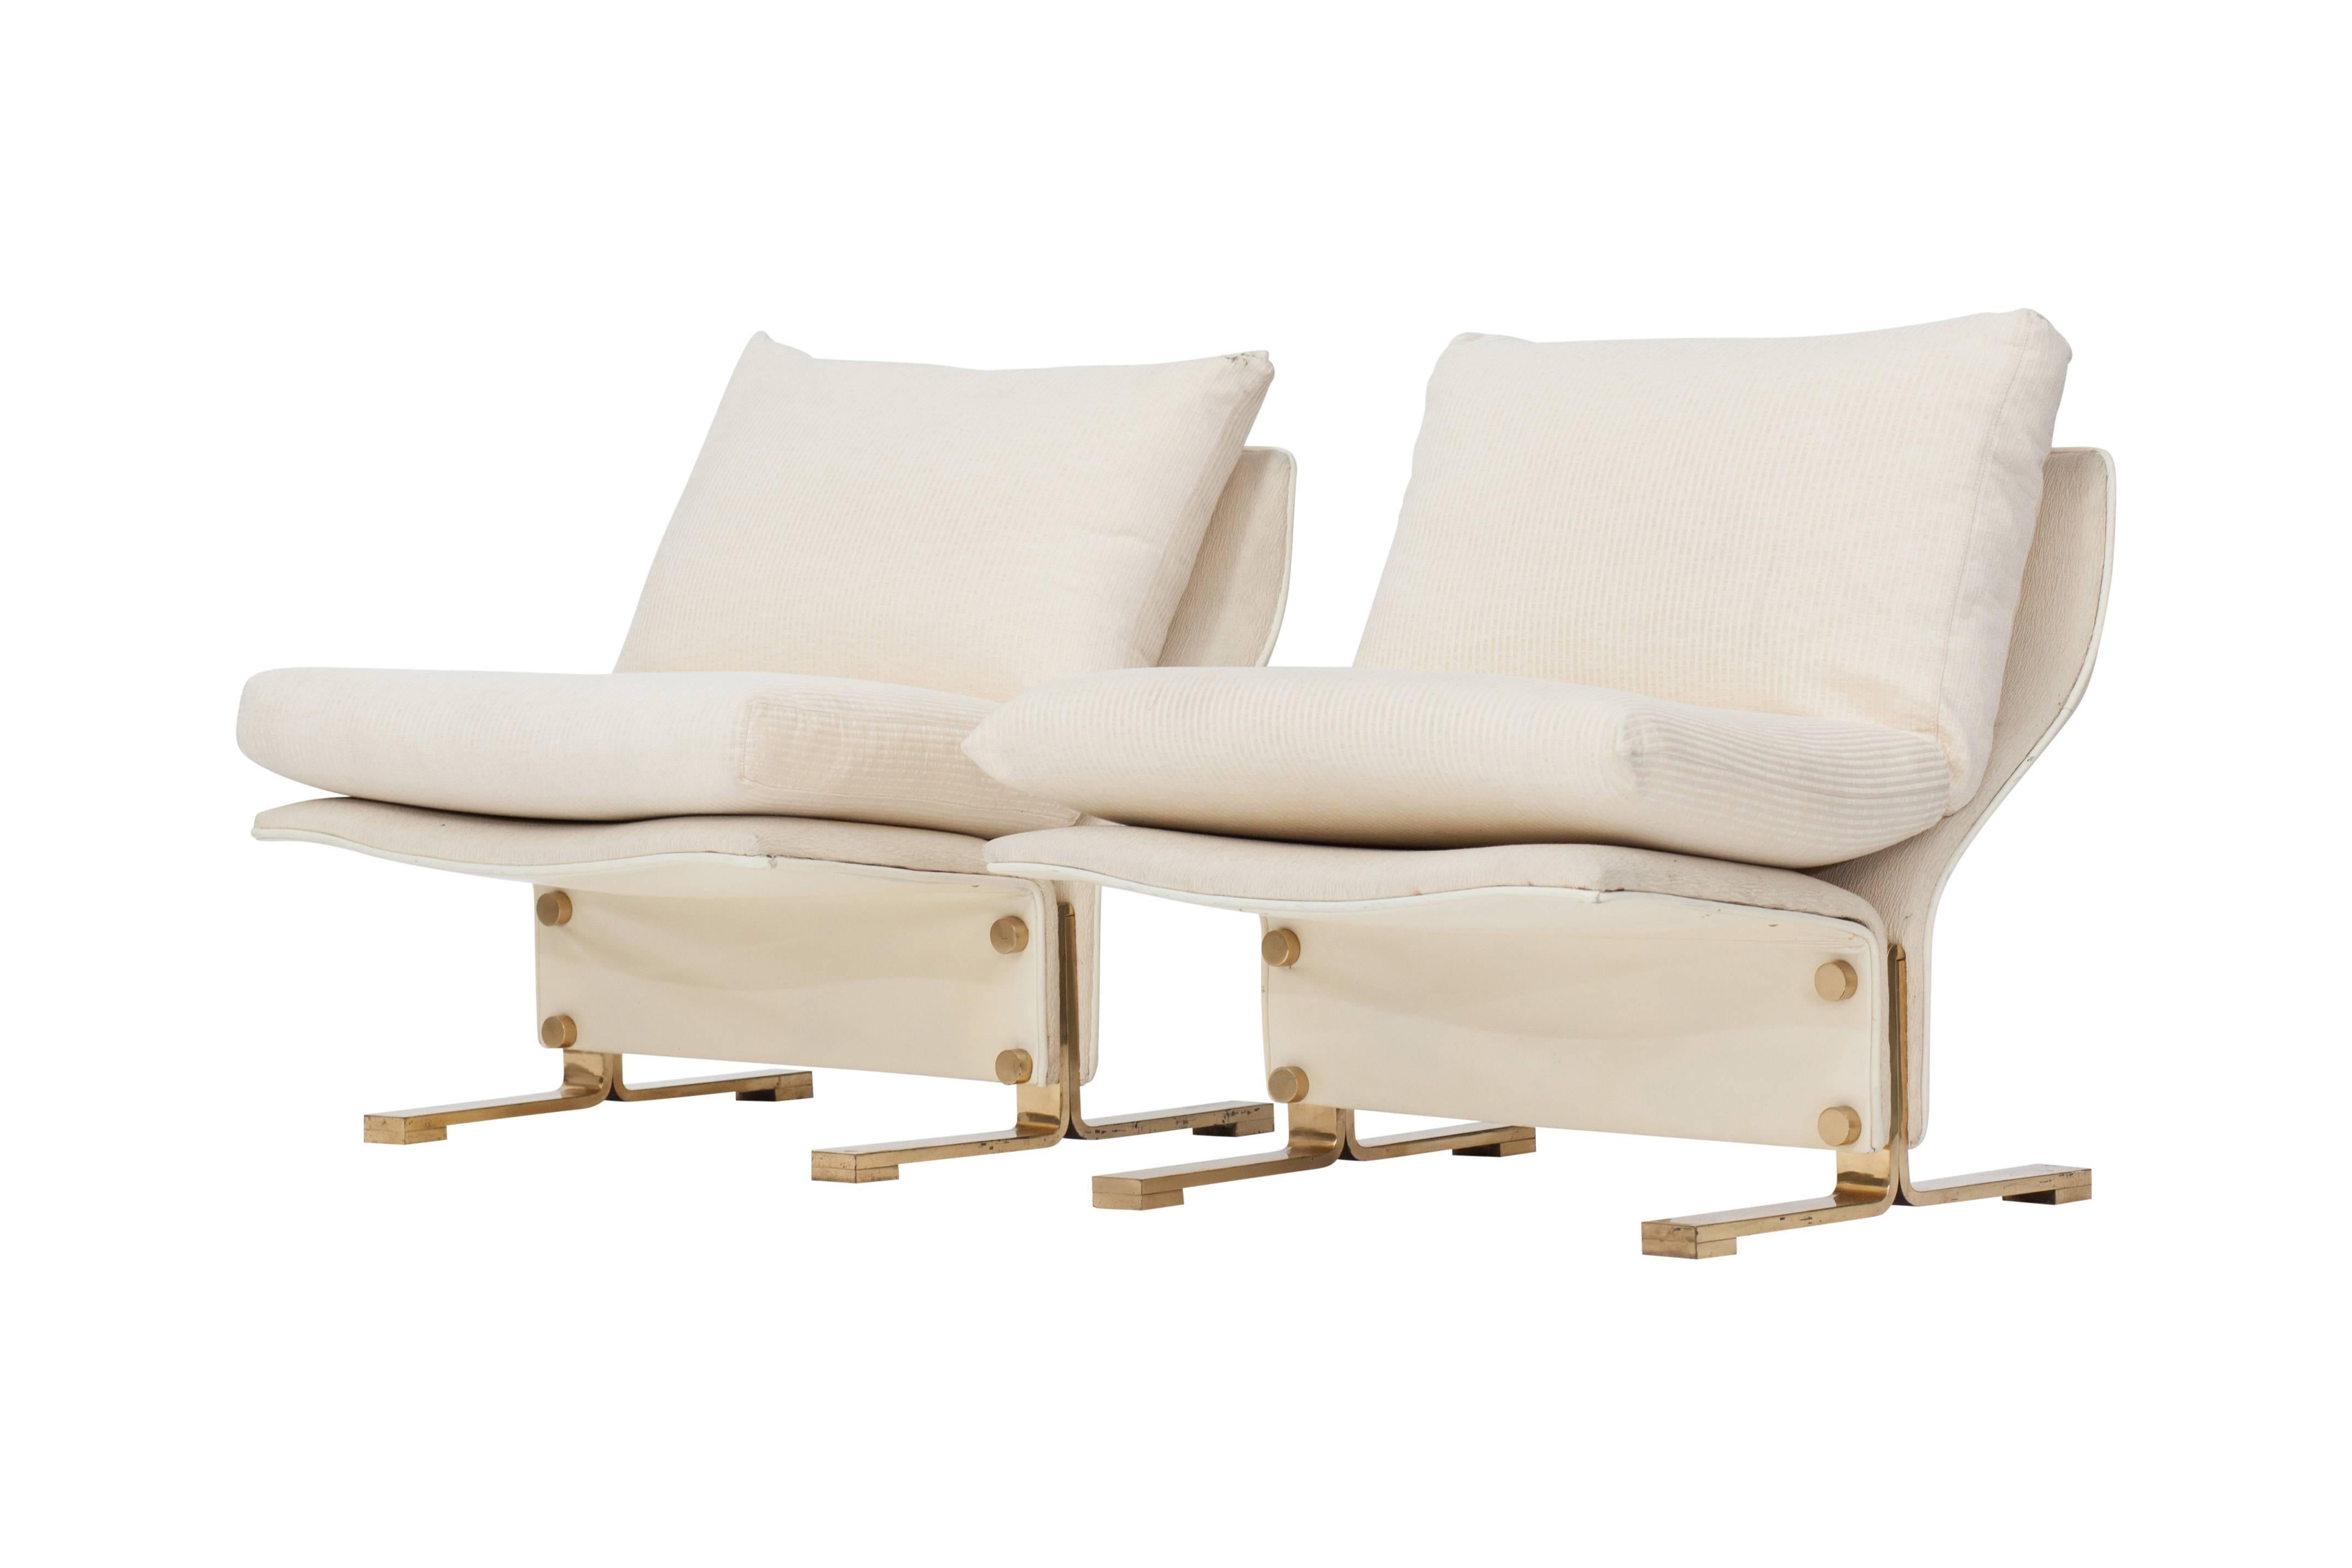 Hollywood Regency Marzio Cecchi Pair of Leather Lounge Chairs Italy, 1960s